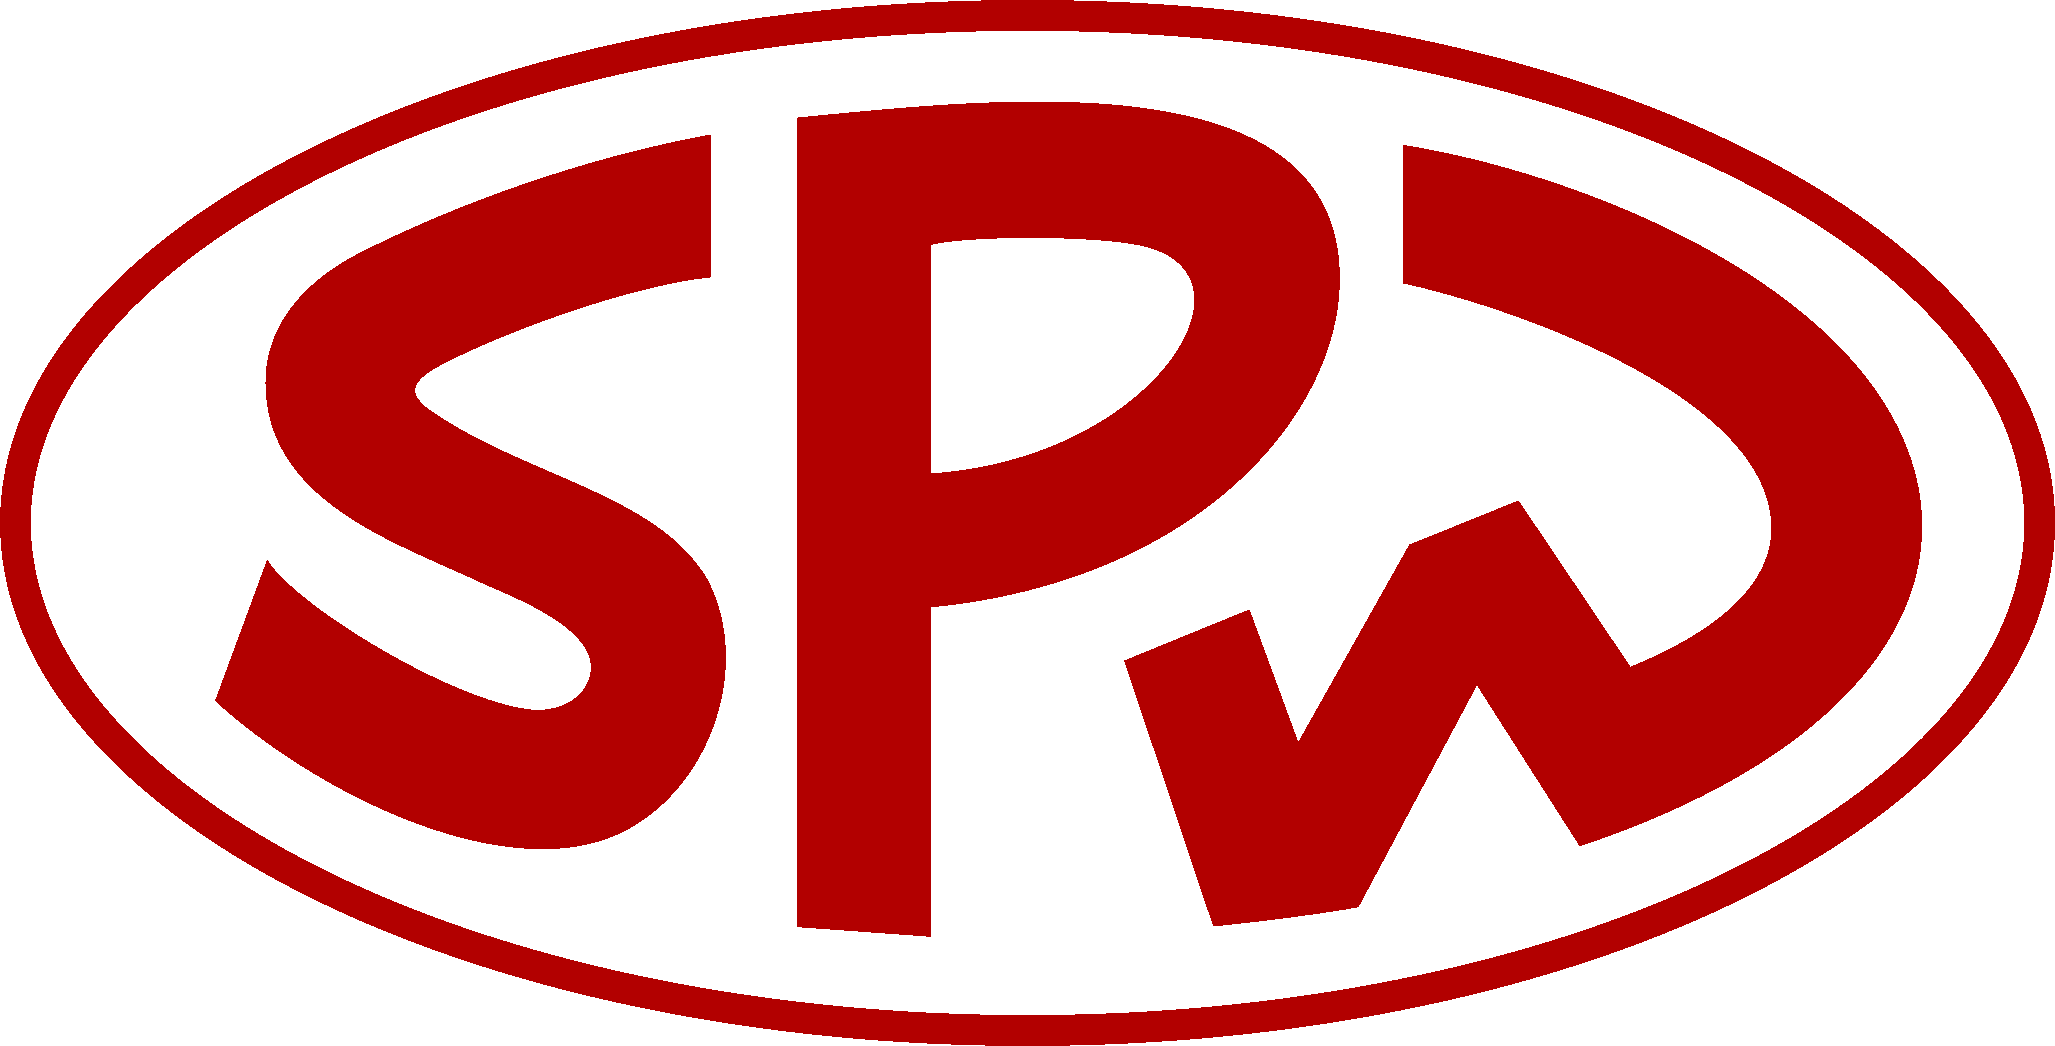 SPW Group